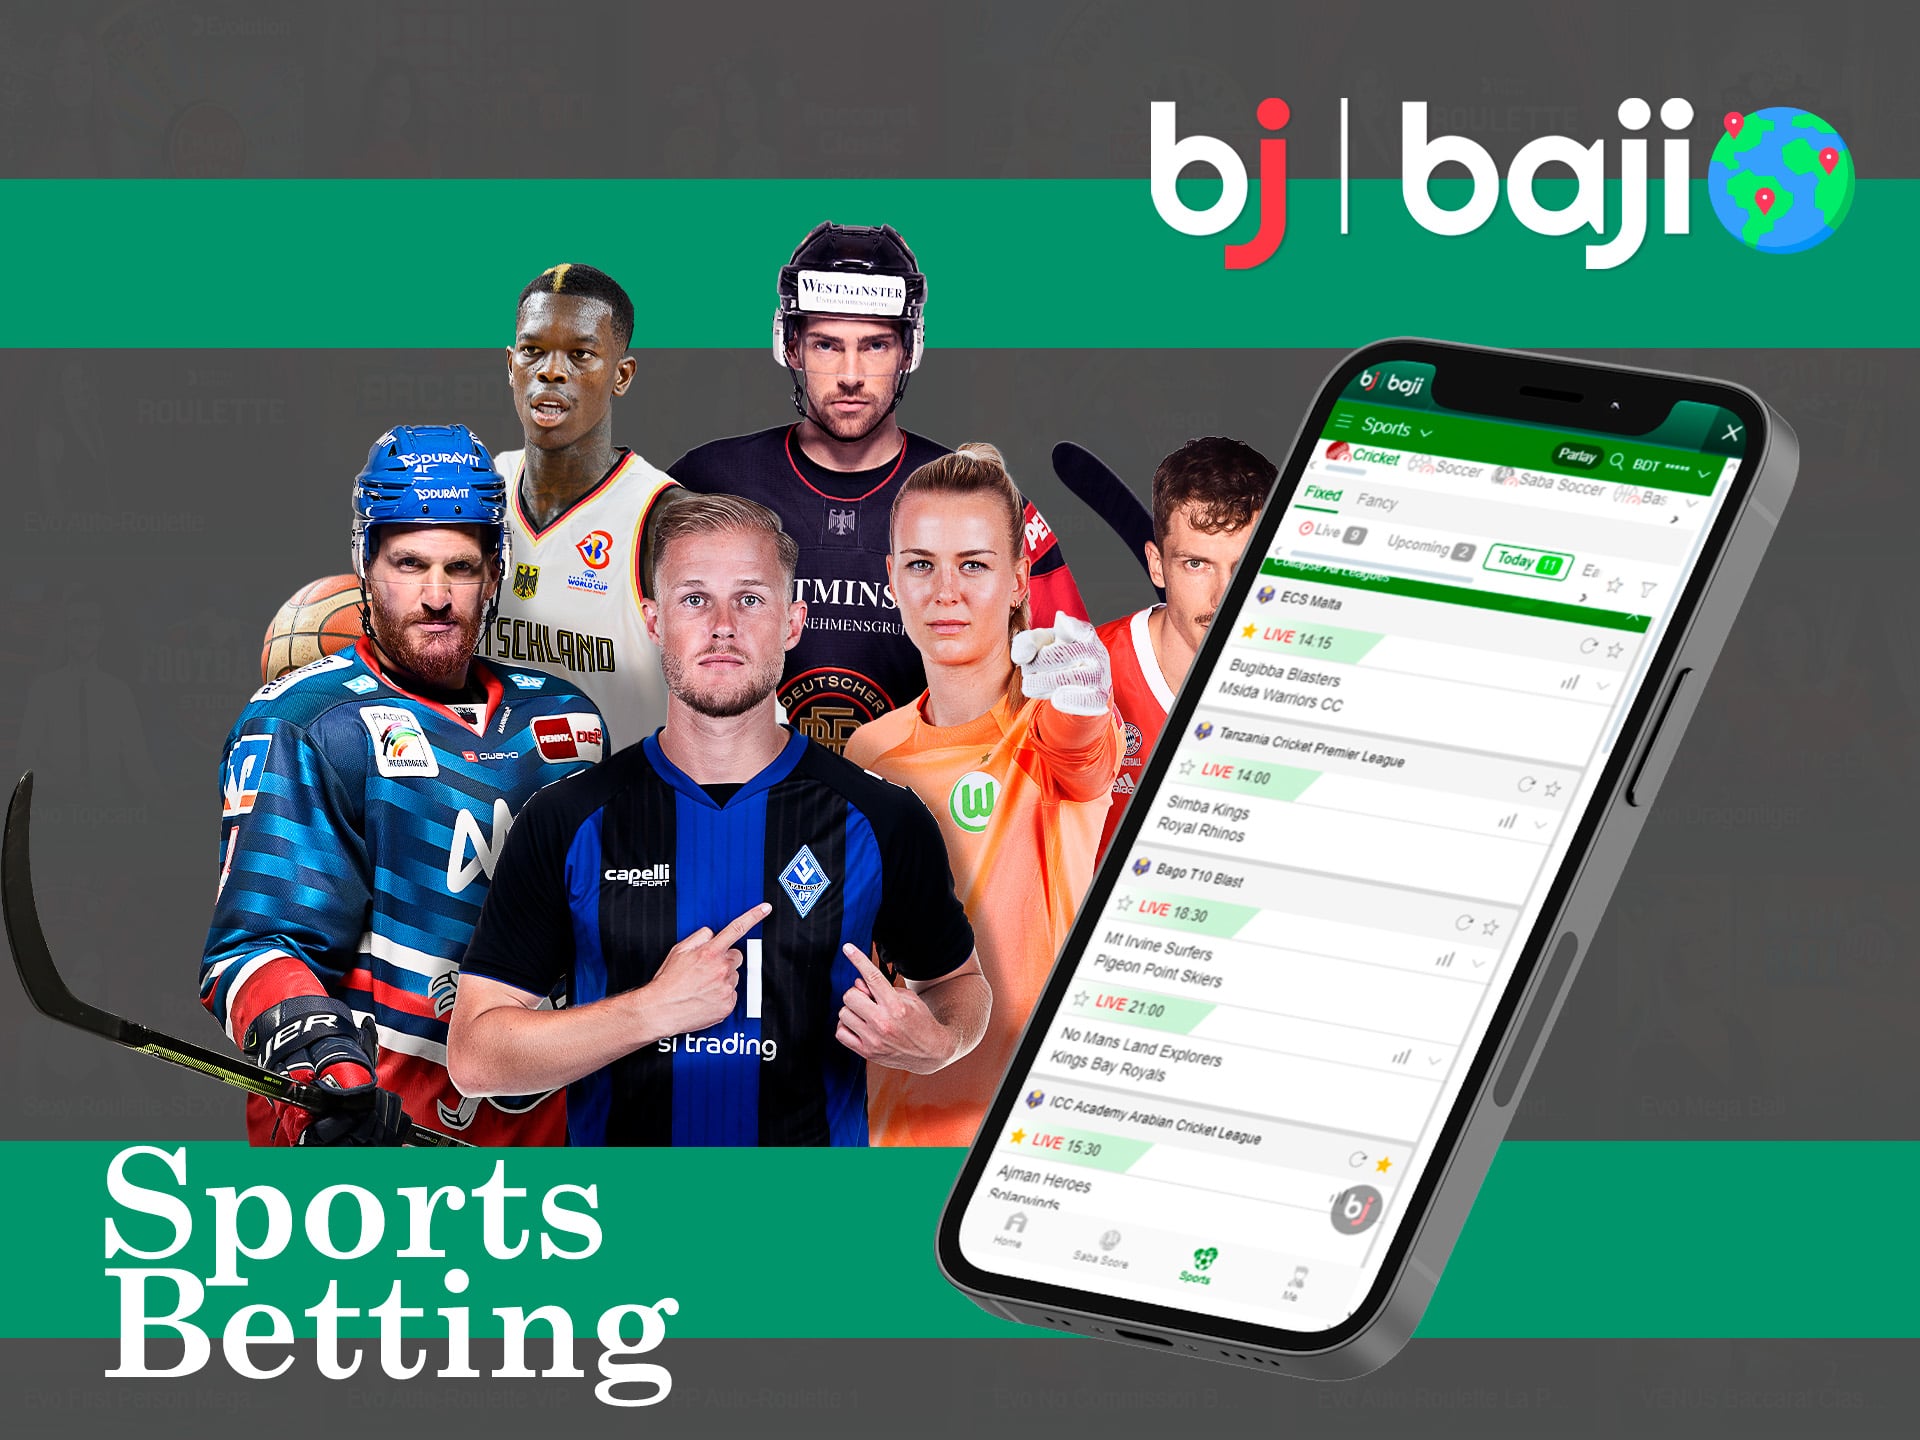 baji game app - sports betting and online casino